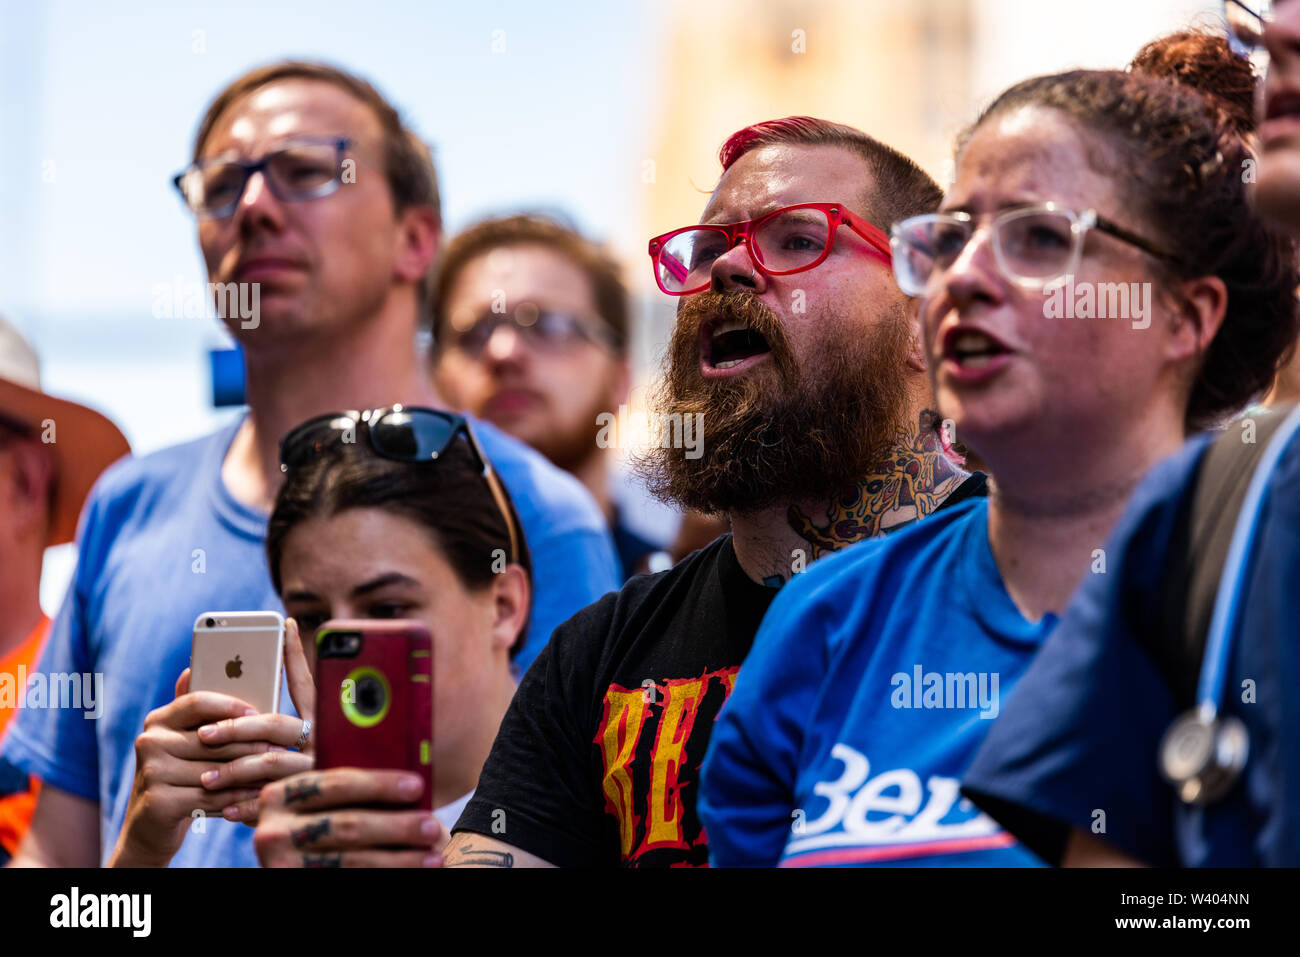 Philadelphia, Pennsylvania / USA. Hundreds rally in front of Hahnemann University Hospital to hear Vermont Senator Bernie Sanders speak in defence of Medicare for All and eliminating private equity funds from controlling health care facilties. July 15, 2019. Photo Credit: Chris Baker Evens. Stock Photo